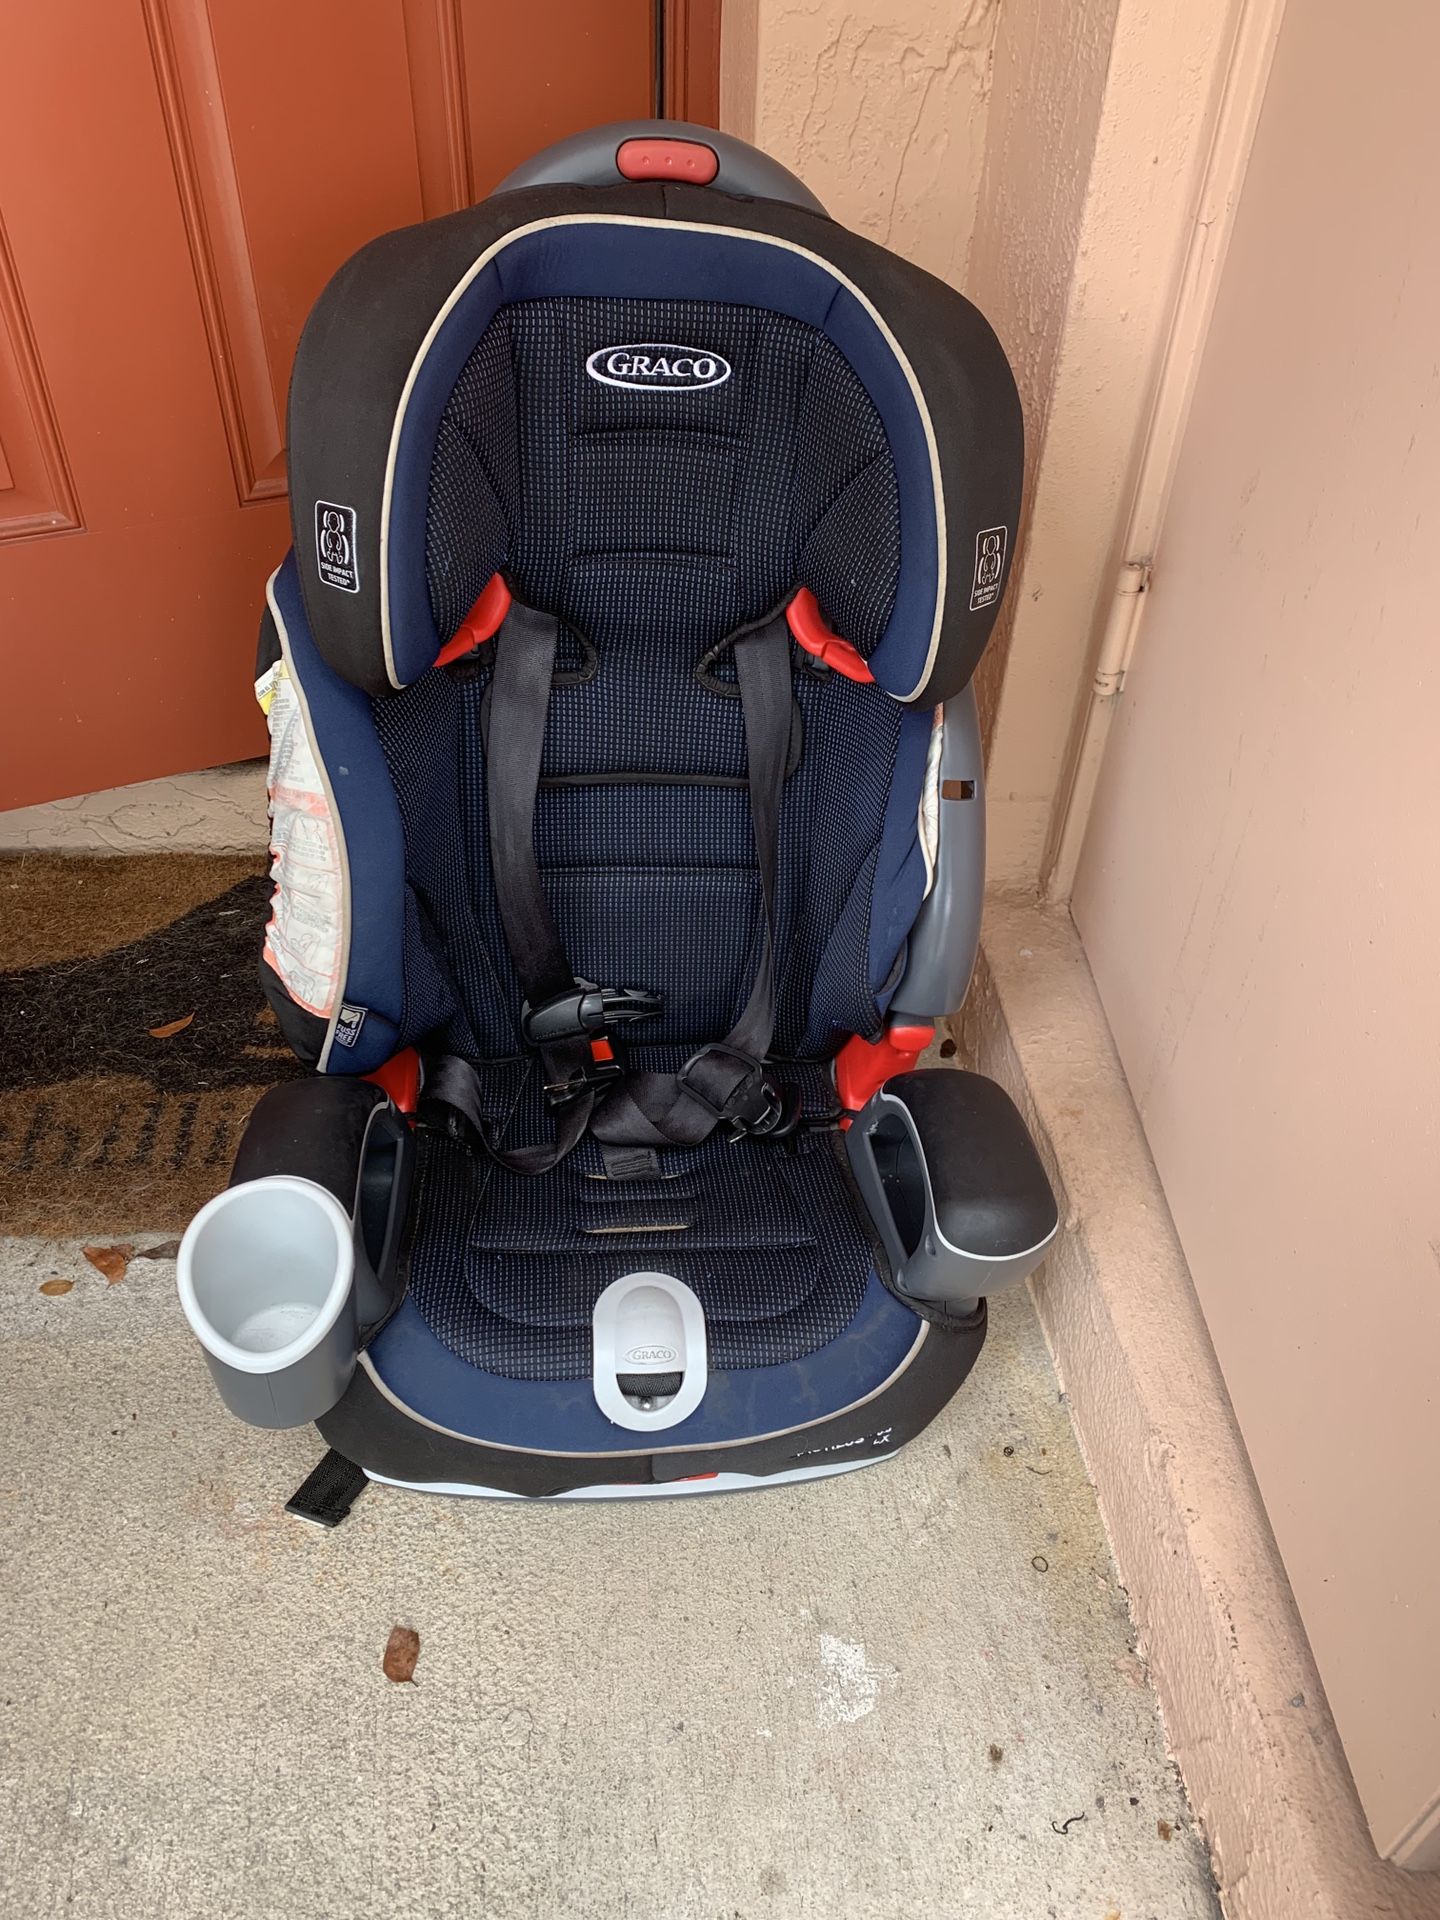 GRACO CAR SEAT FOR TODDLERS